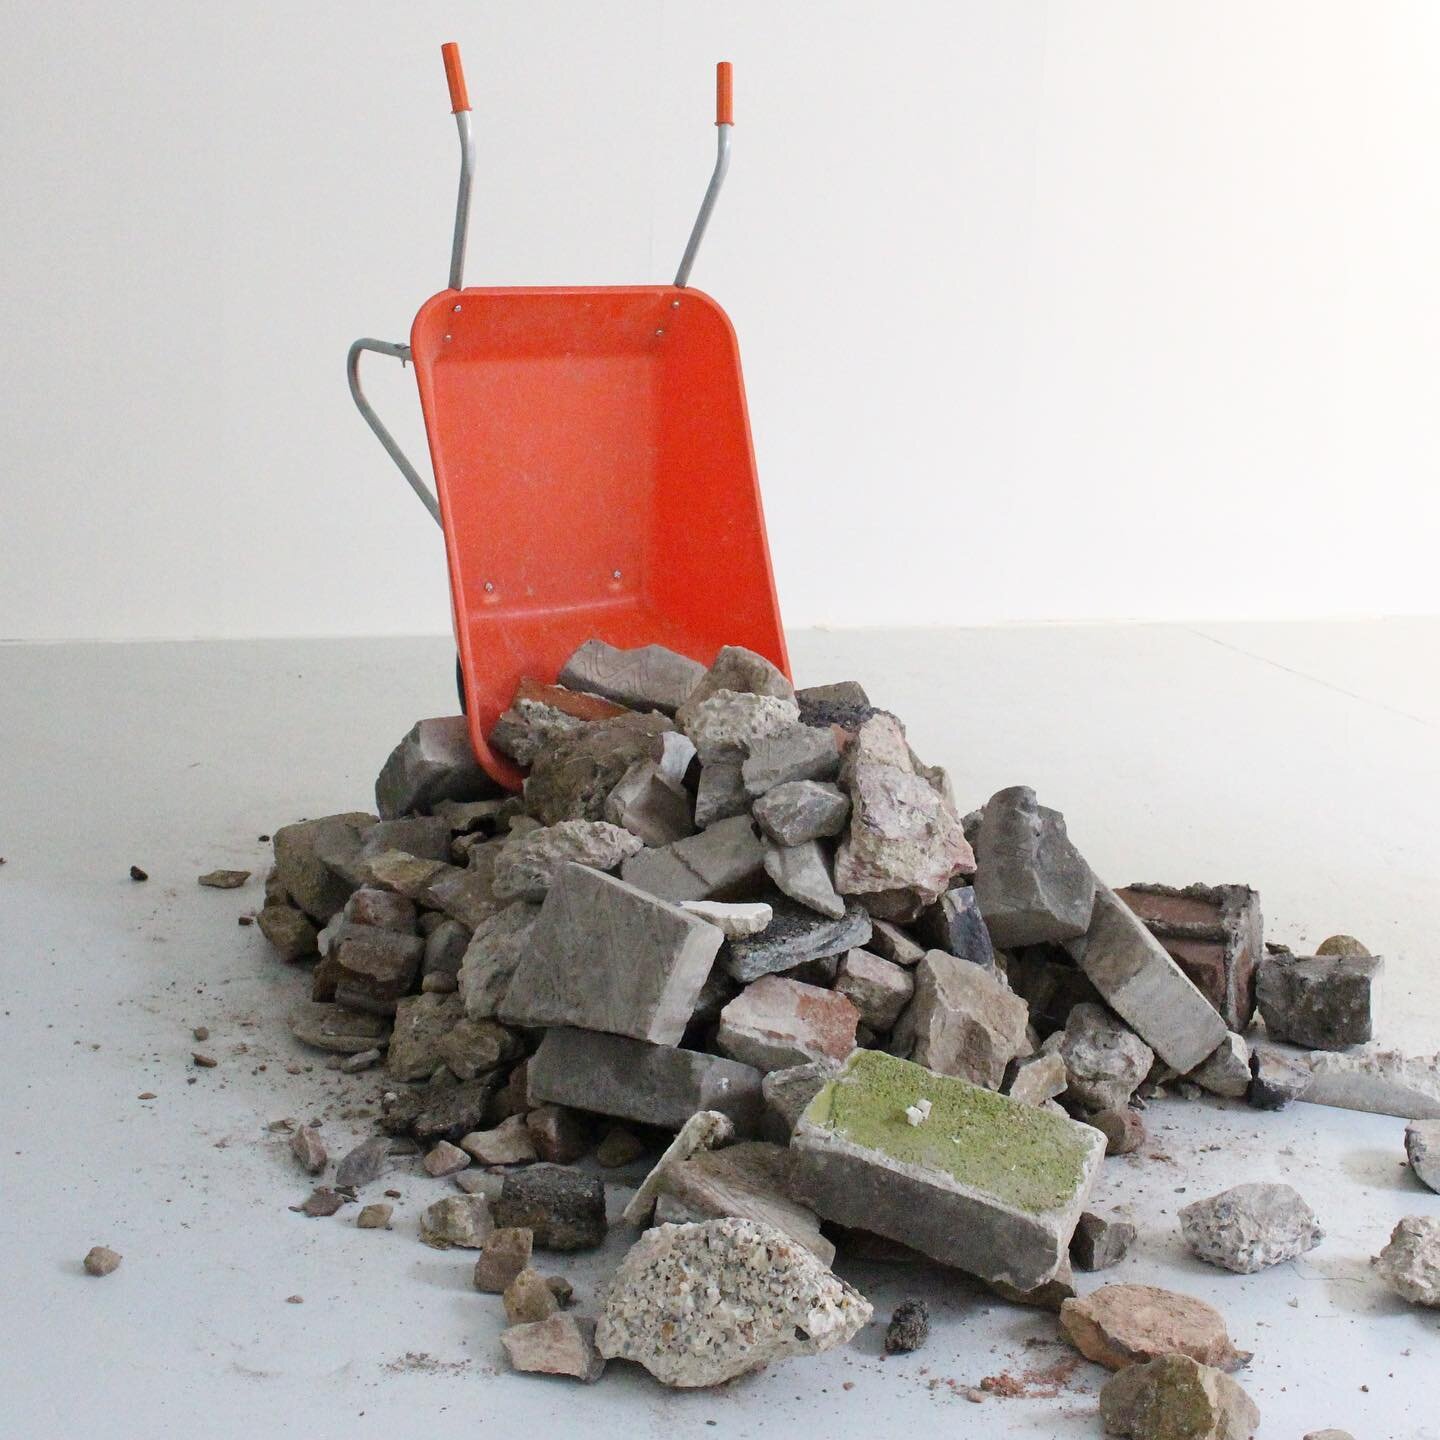 Rubble survey of 22 George Pl, Stonehouse, Plymouth PL1 3NY
At @karstgallery photo by  @ddoommmmoorree. curated by @jordanbaseman 
2016 
.
.
.
#ruins #rubble #isometriclifting #wheelbarrow #performingsculpture #archiving #localarcheology